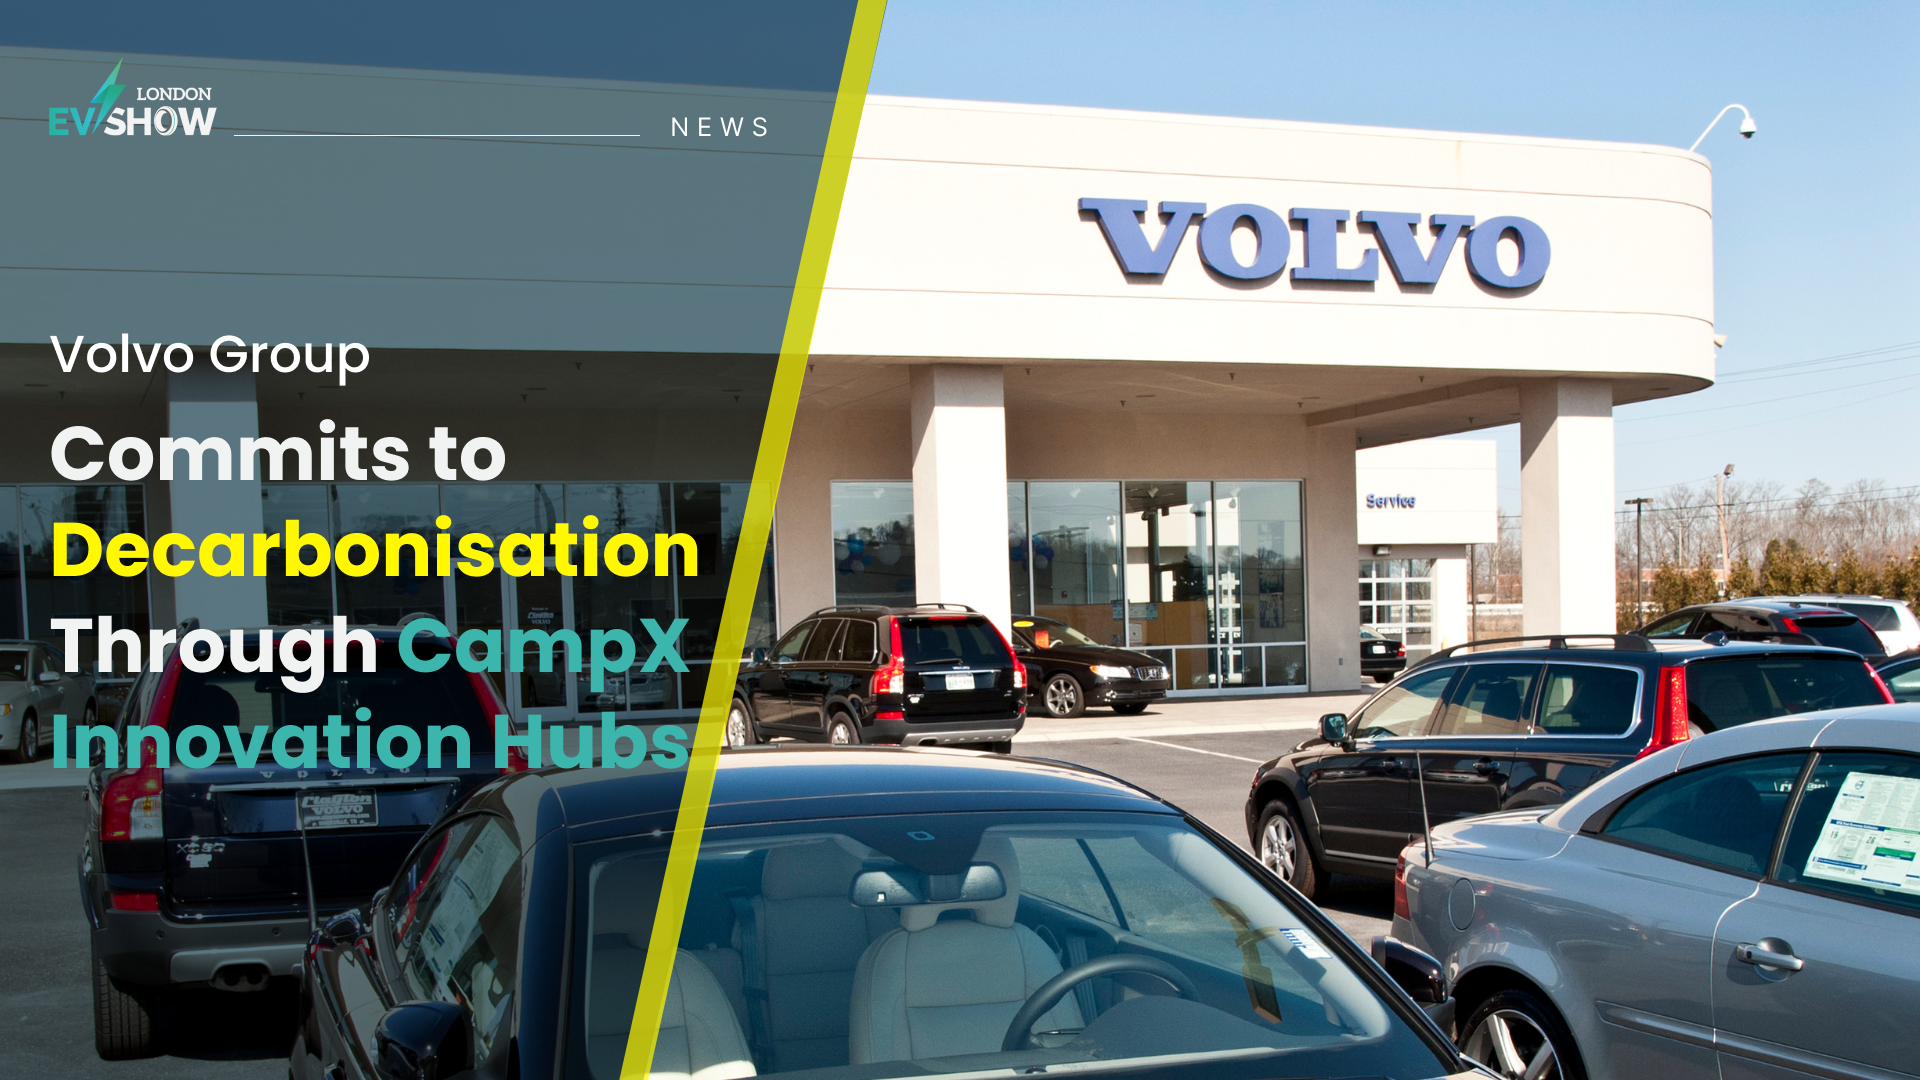 Volvo Group Commits to Decarbonisation Through CampX Innovation Hubs